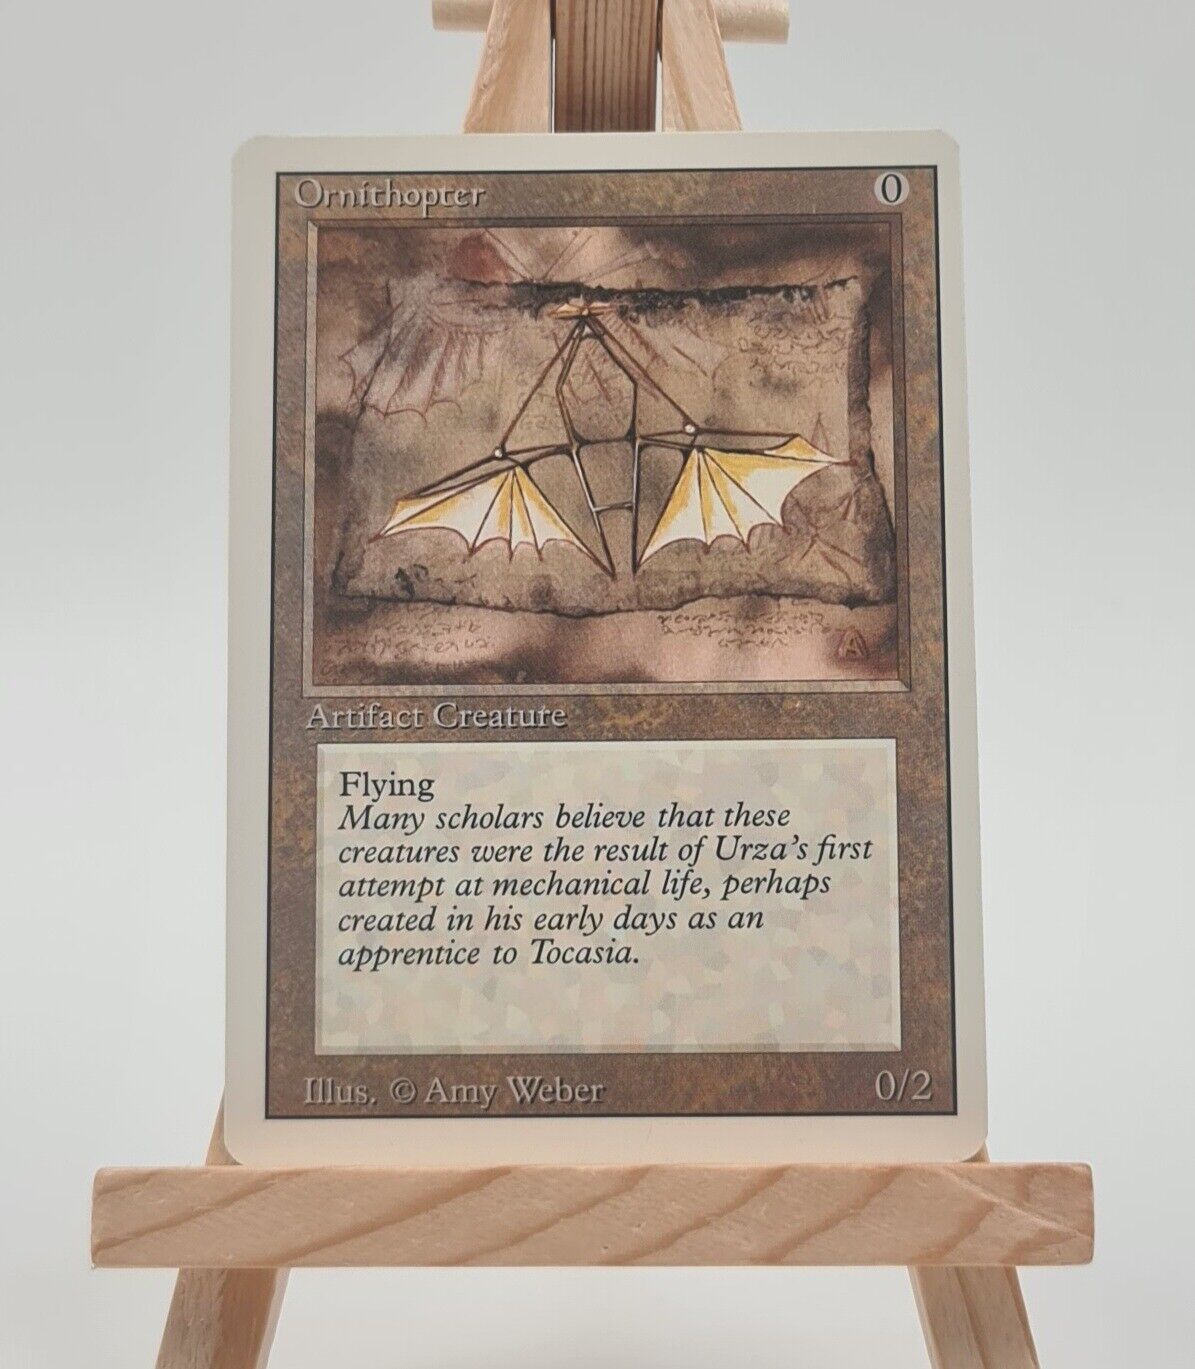 Ornithopter Revised - 3. Edition Magic Card English (Ornithopter) 